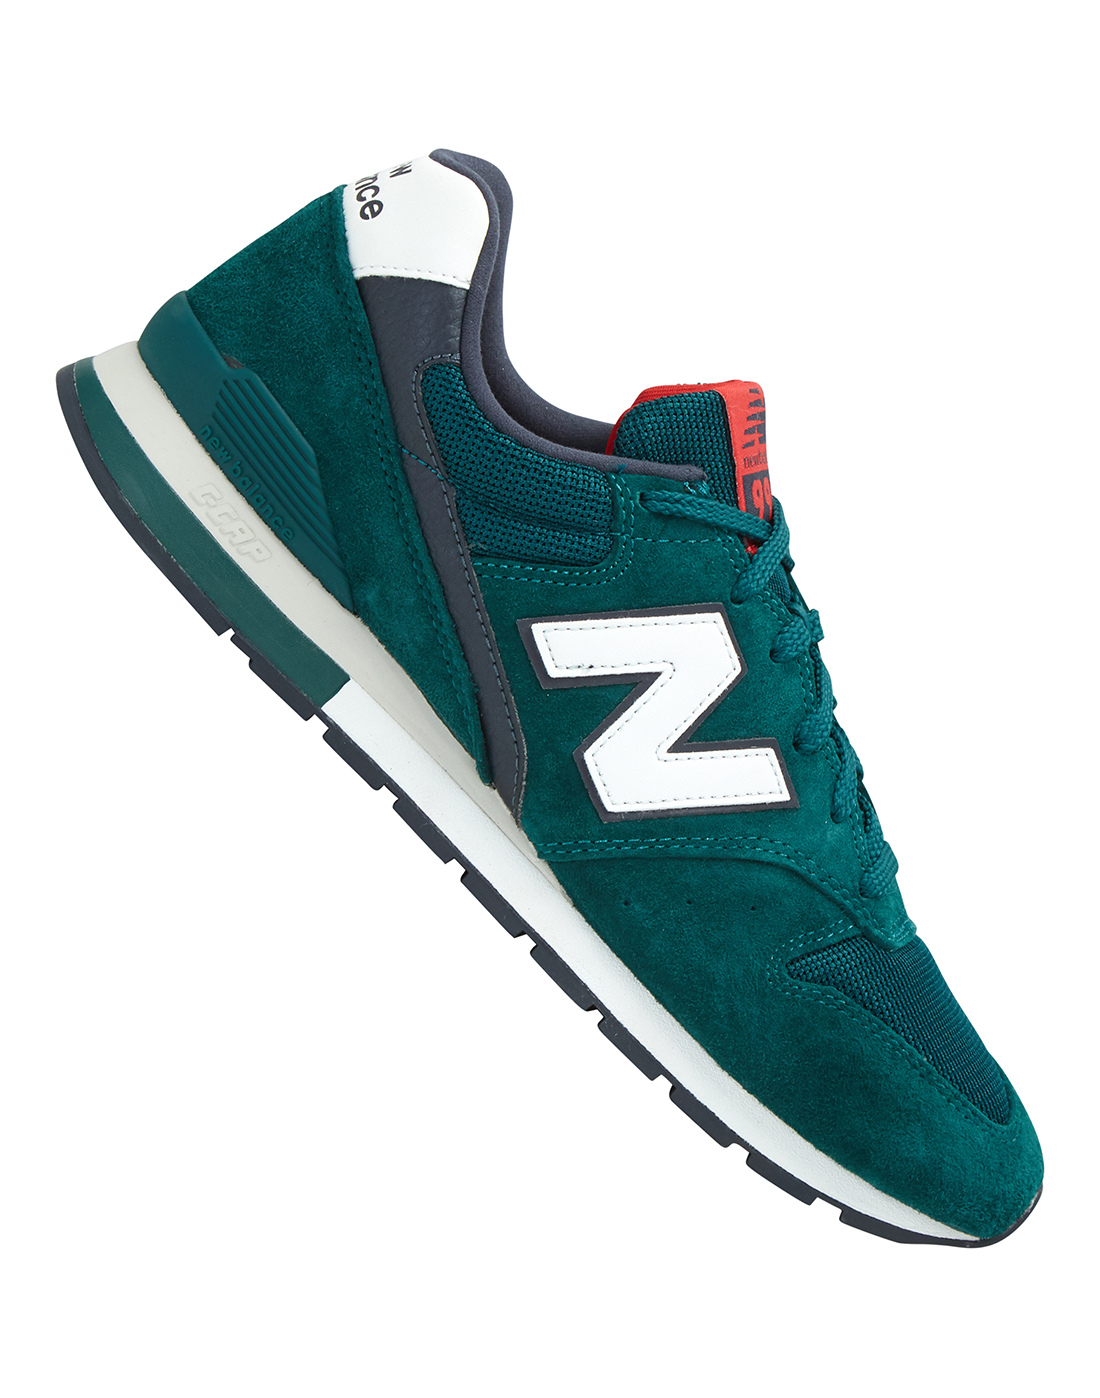 Funeral personalidad Marcha mala New Balance Mens 996 Trainers - Green | Life Style Sports IE